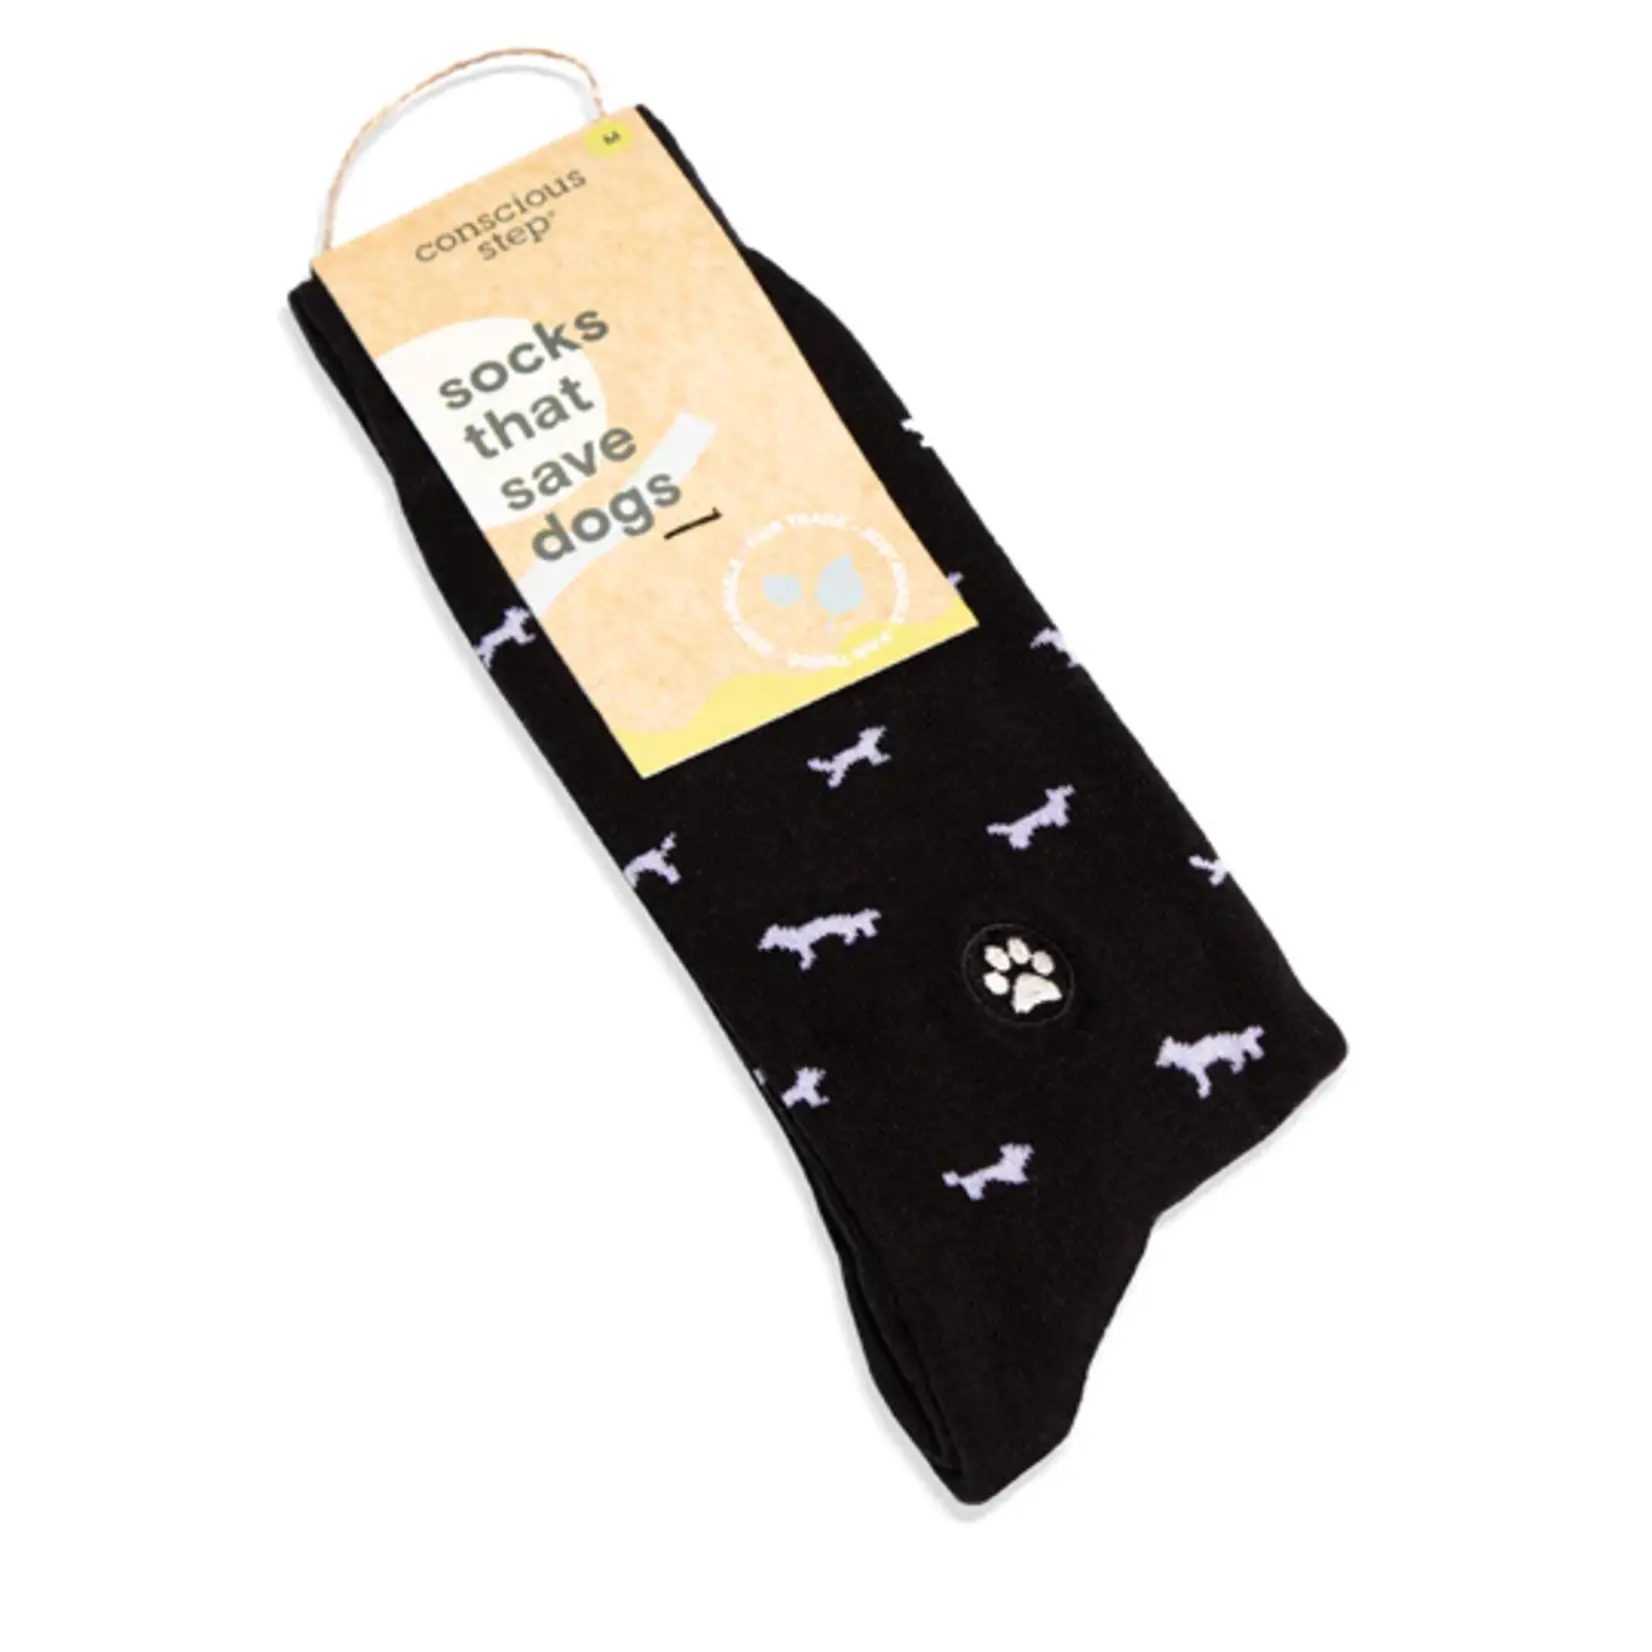 Socks that Save Dogs | Small